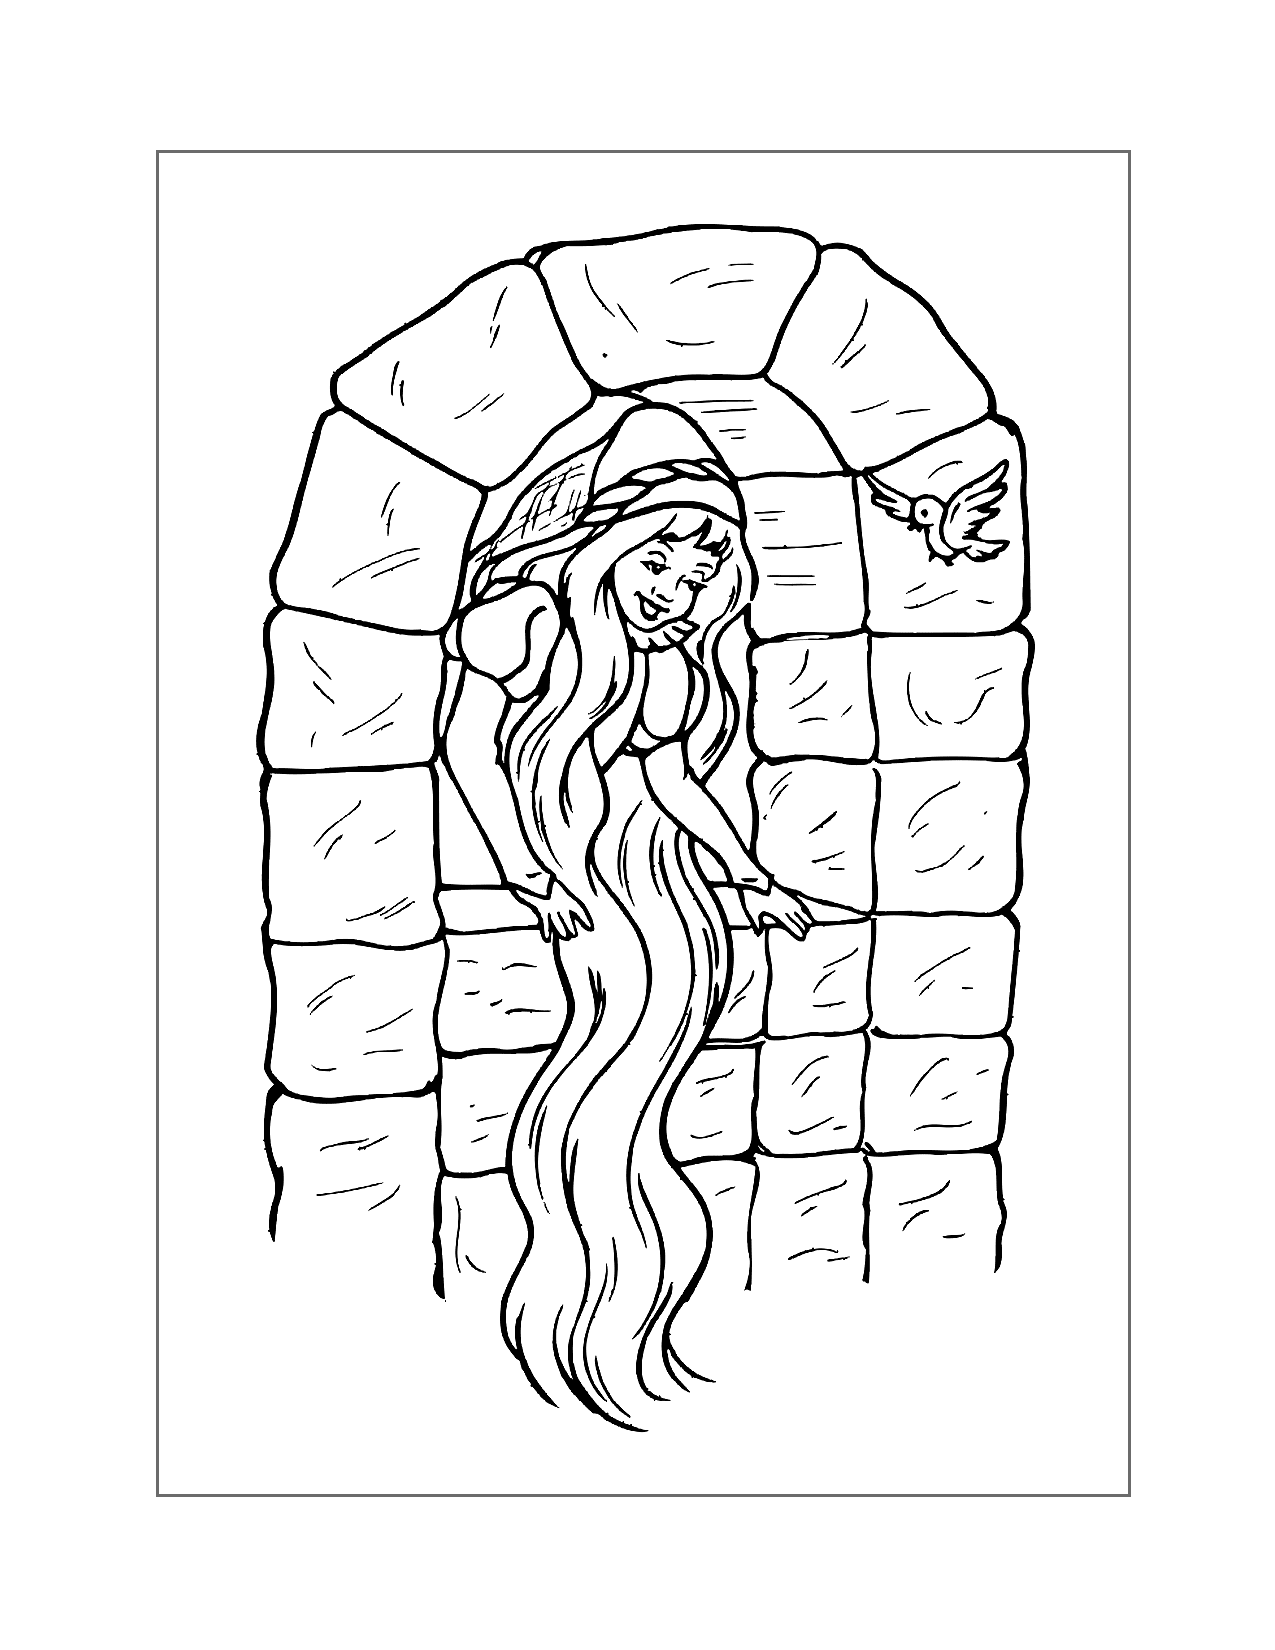 Rapunzel Letting Down Her Hair Coloring Page